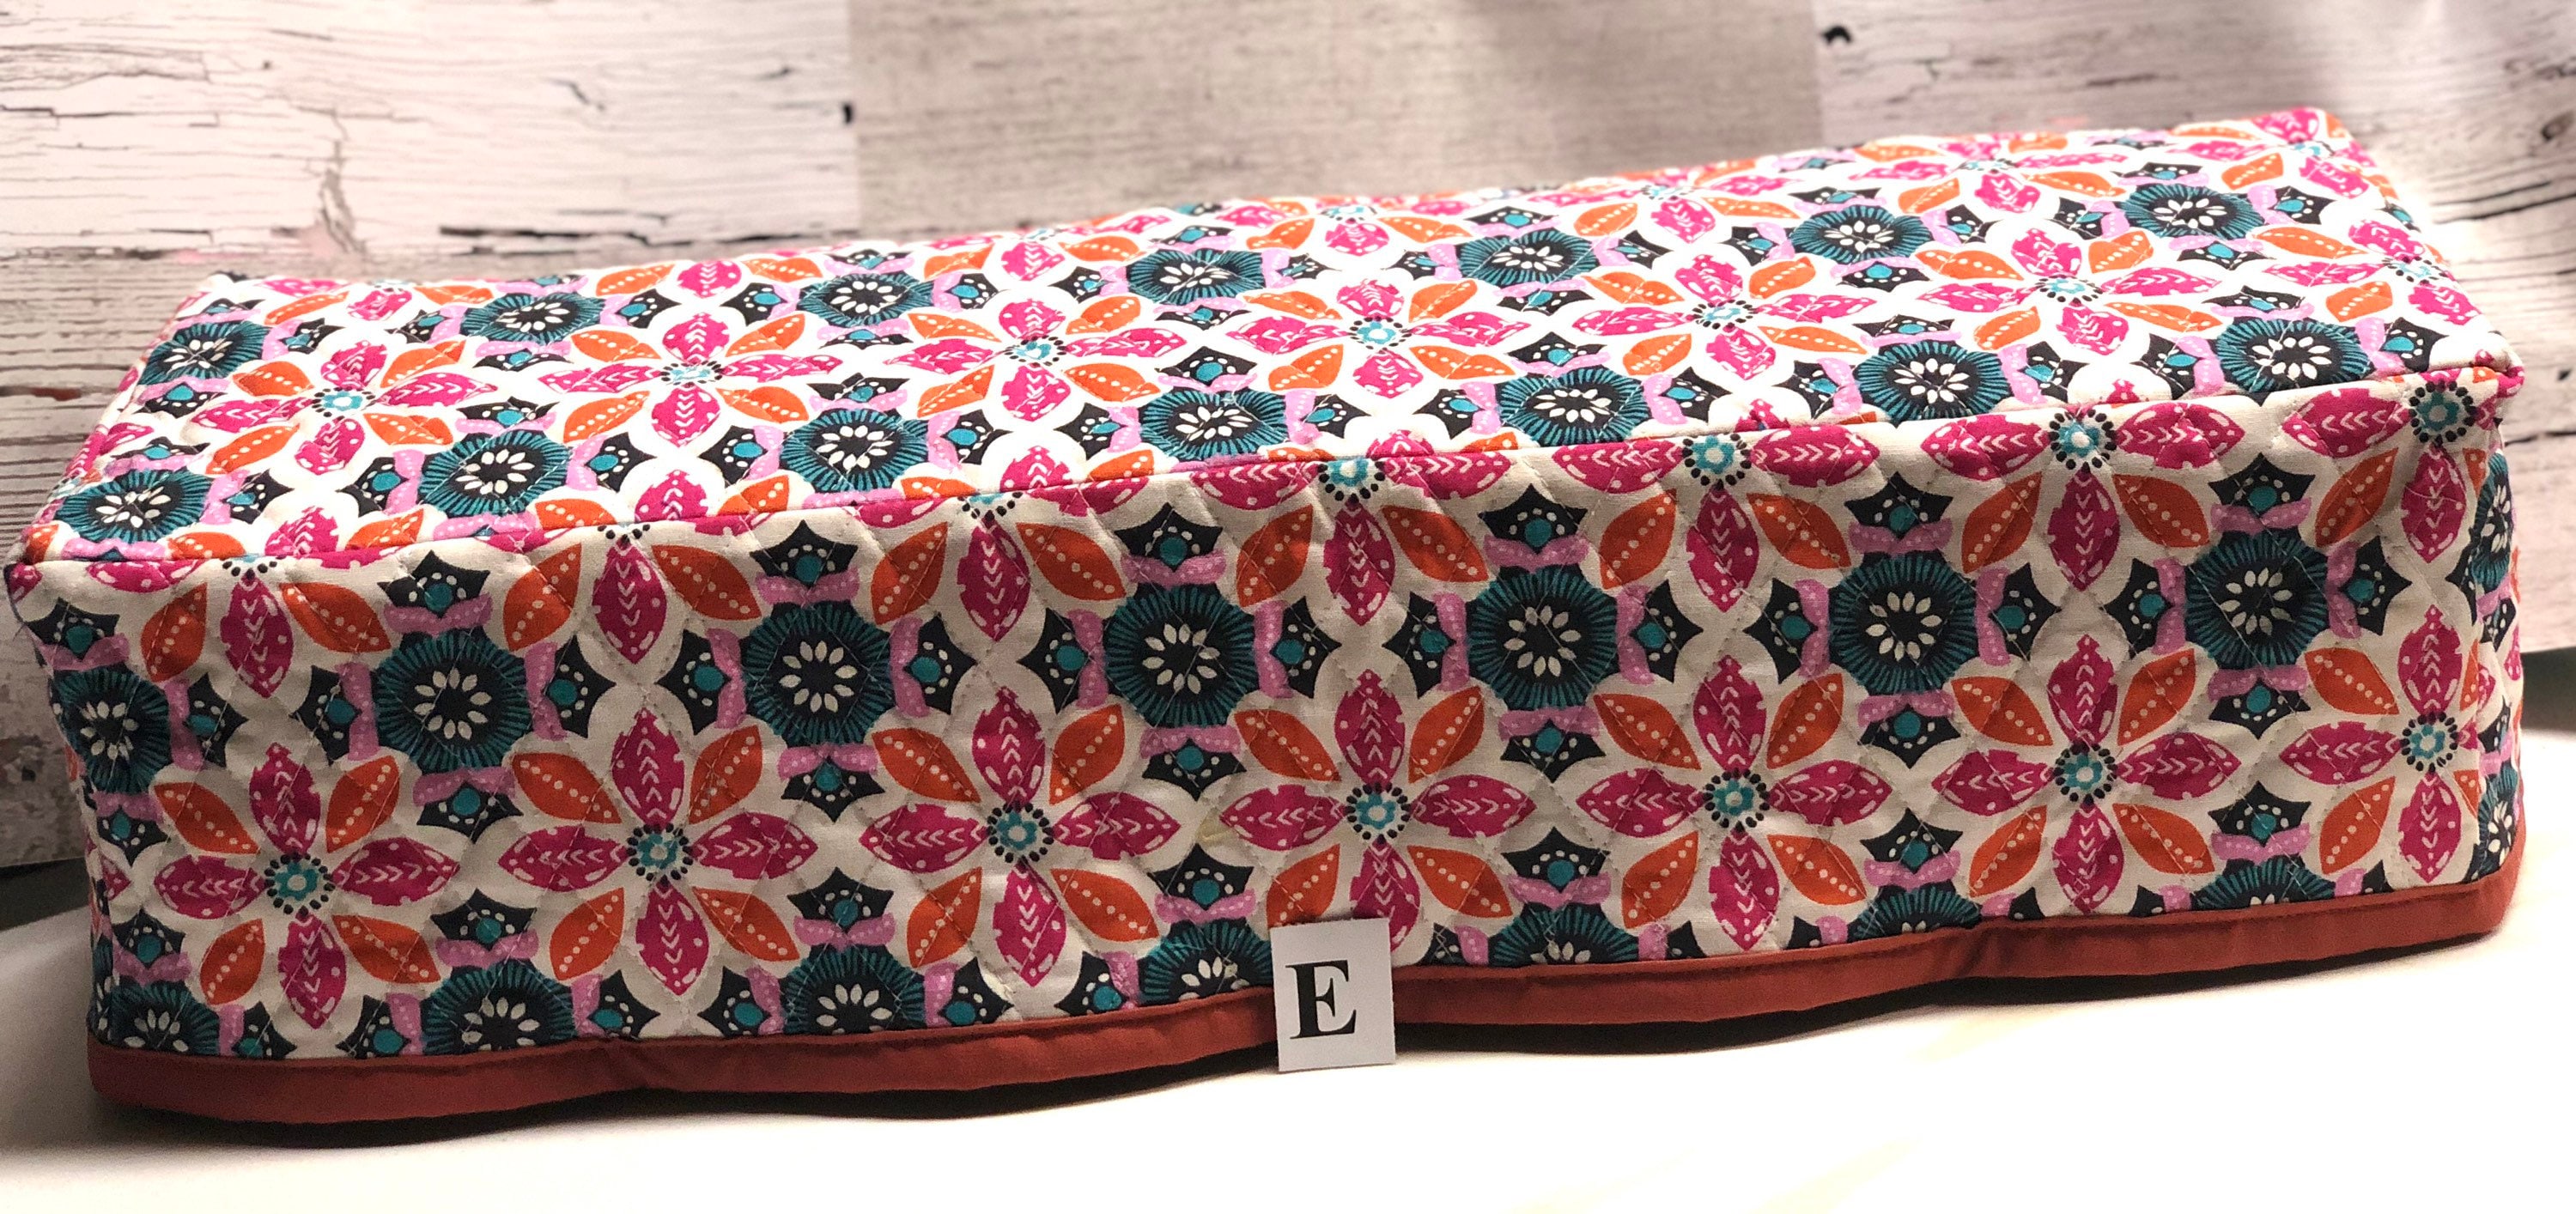 I soo want to make this dust cover for my Cricut Expression, in this exact  pattern.